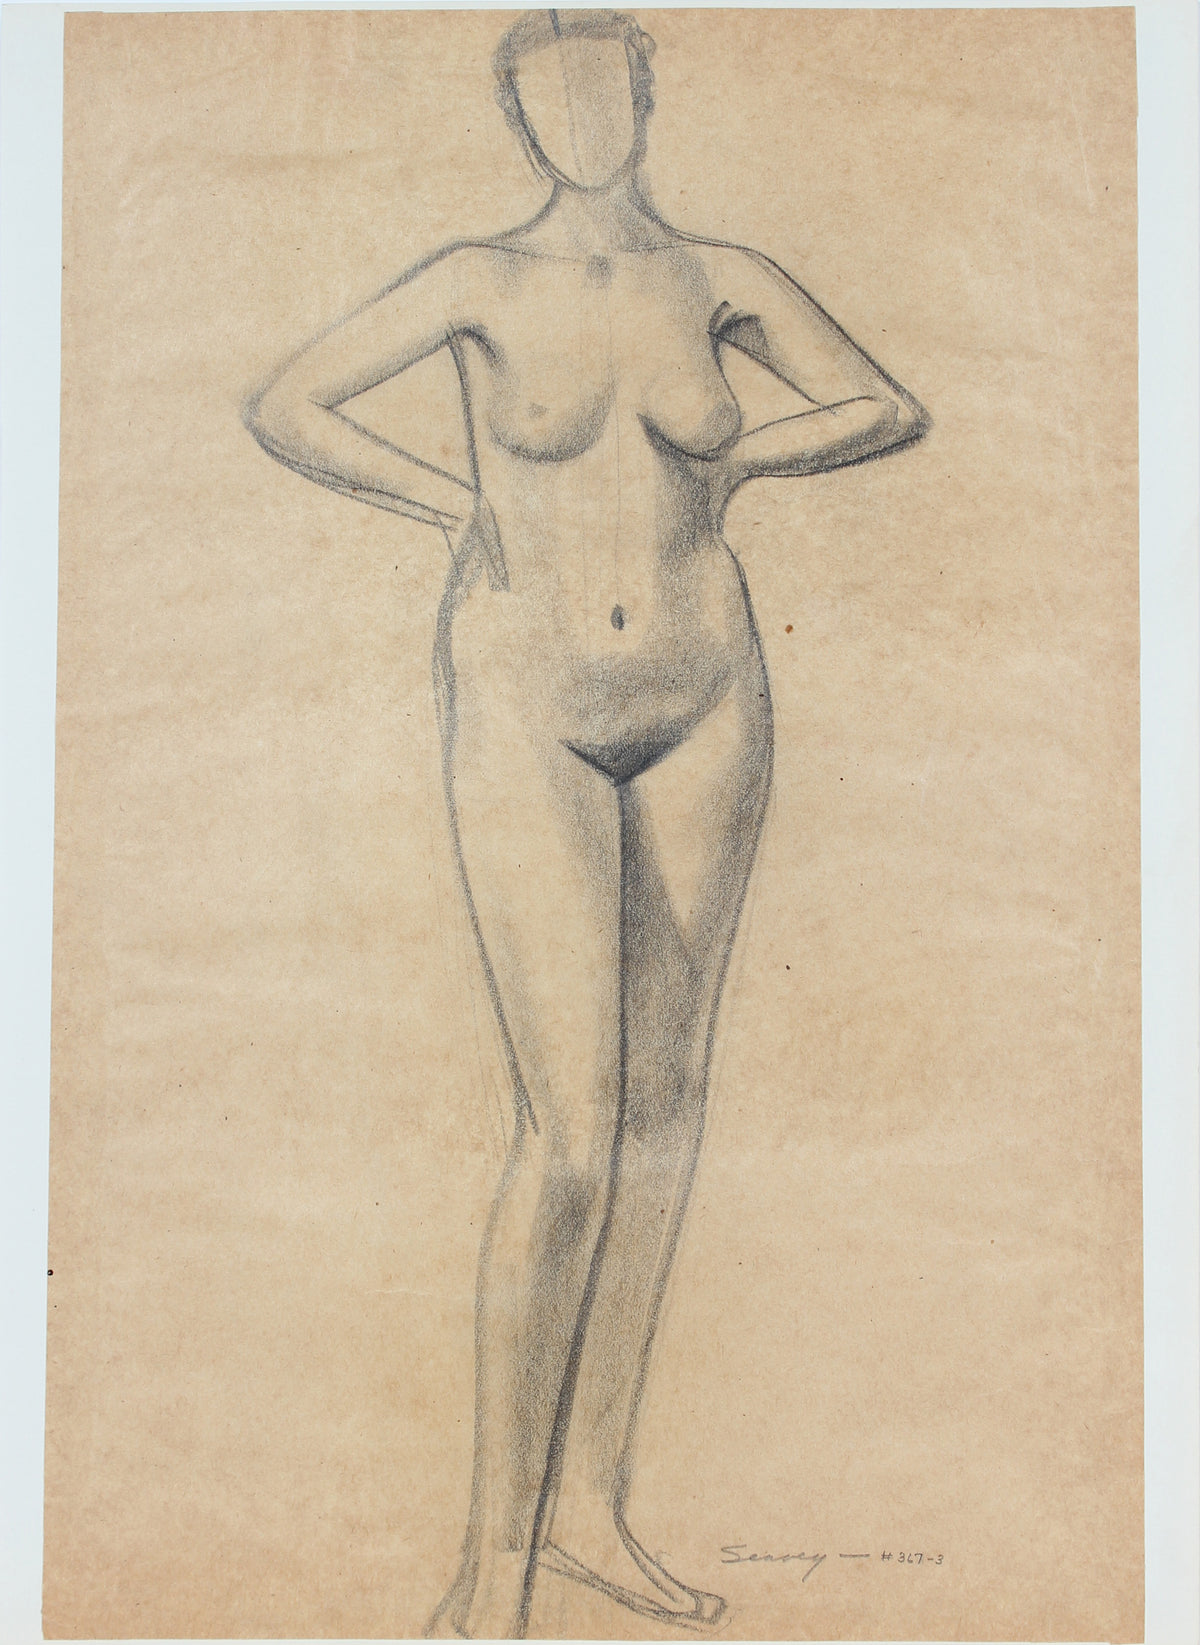 Figurative Study of a Female Nude &lt;br&gt;1920-30s Graphite &lt;br&gt;&lt;br&gt;#9395